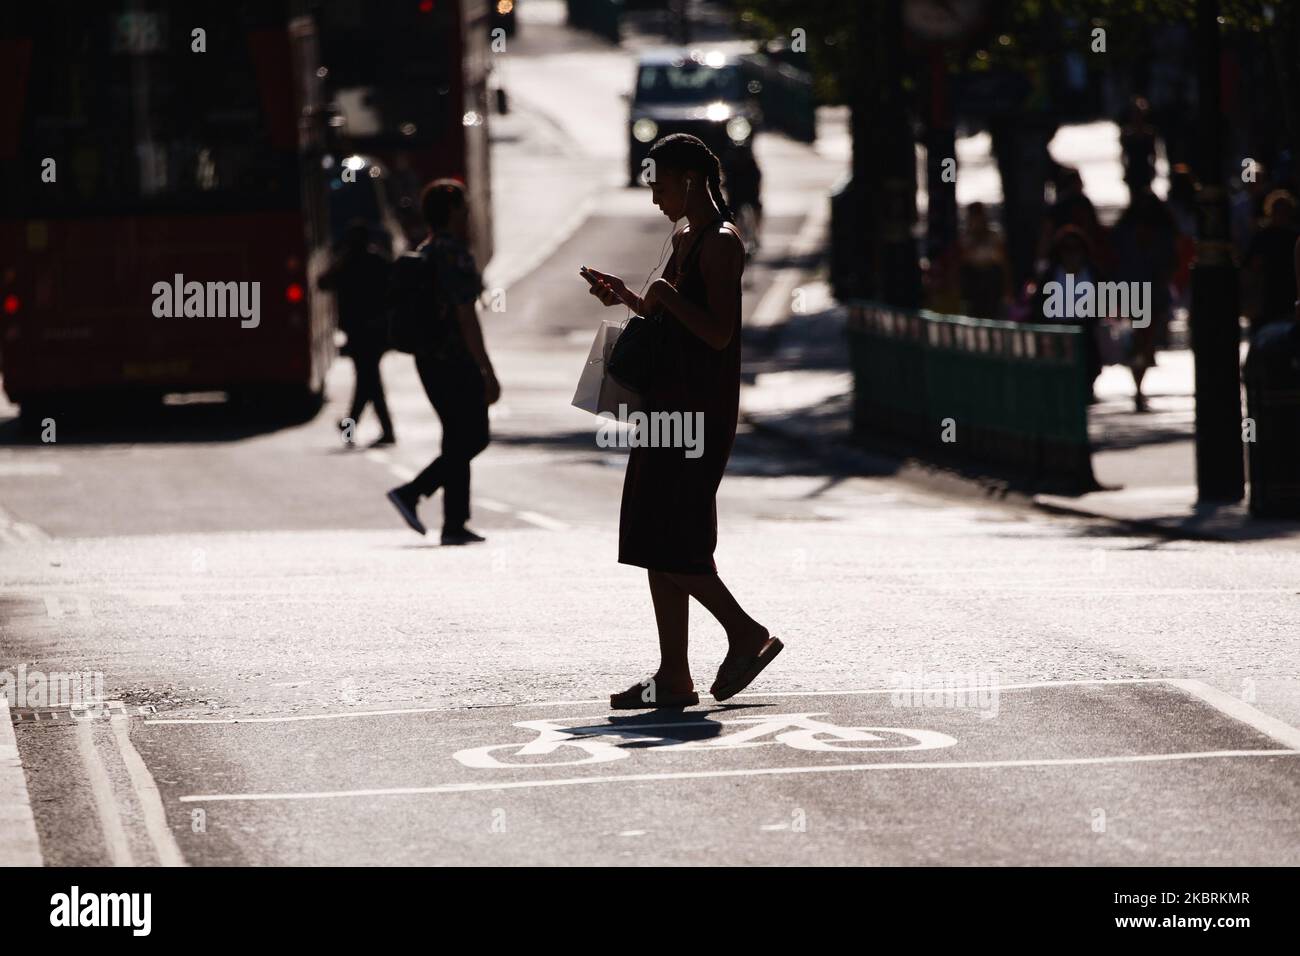 A shopper crosses Oxford Street in heatwave conditions in London, England, on June 25, 2020. Temperatures rose to 33C in parts of London today, in what has been one of the UK's hottest days of the year so far. Central London was nonetheless busy with shoppers this afternoon as the retail sector mounts its comeback after coronavirus lockdown restrictions on non-essential shops were eased at the beginning of last week. Among retailers, confidence is reportedly low that recovery will be swift, however, with a survey from the Confederation of British Industry (CBI) today revealing fears of reduced Stock Photo